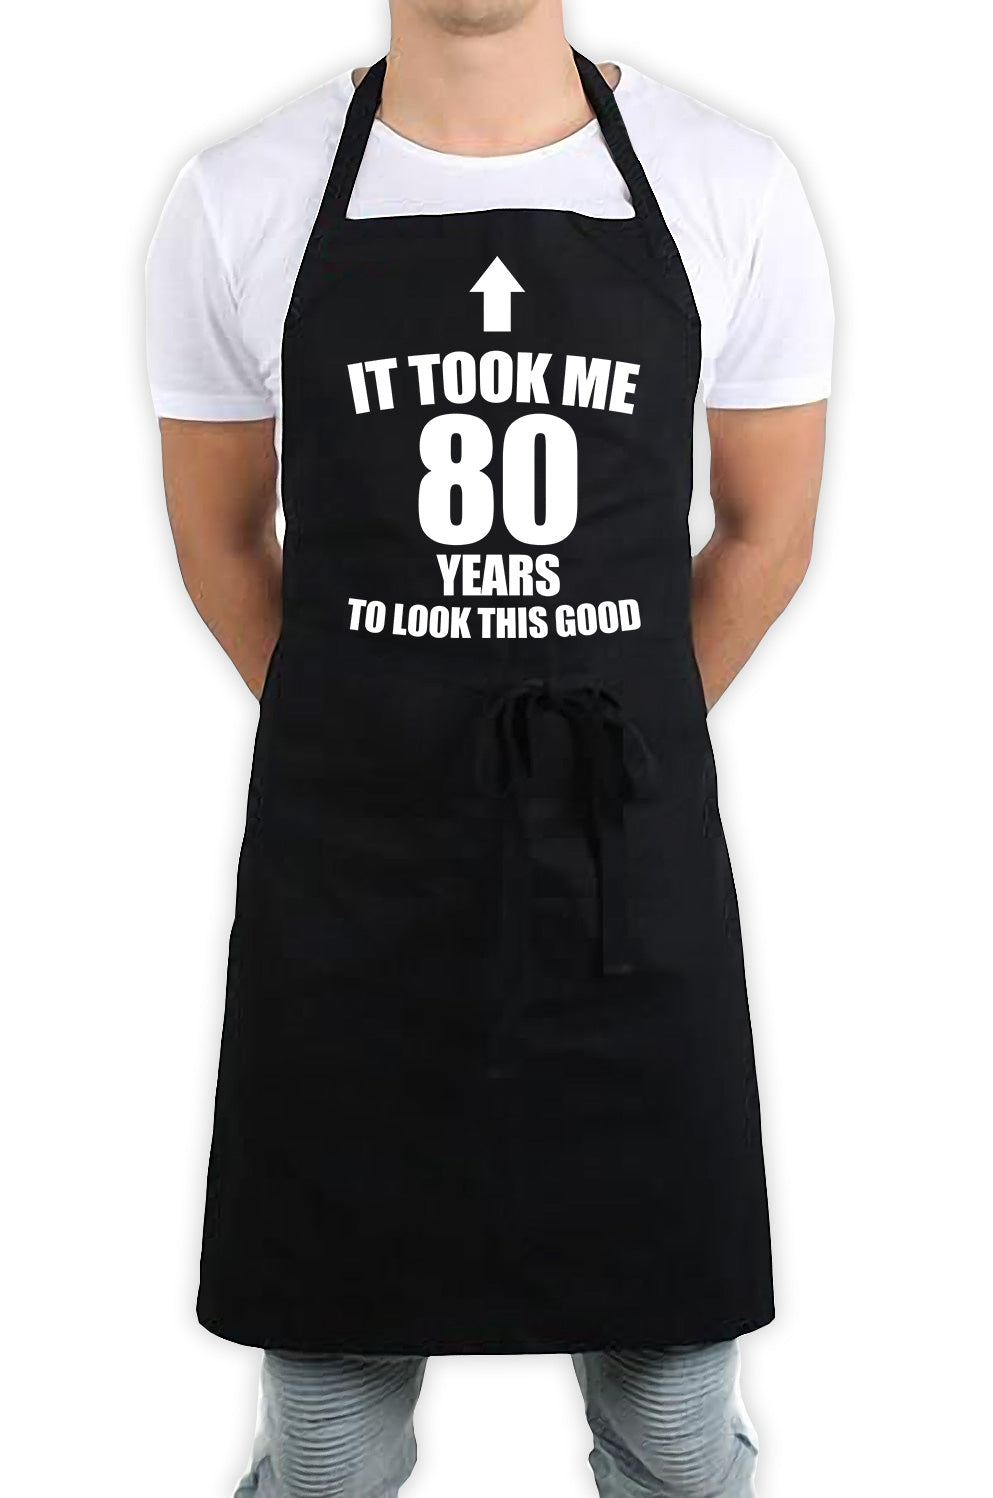 It Took Me 80 Years To Look This Good Funny Kitchen BBQ Apron Black